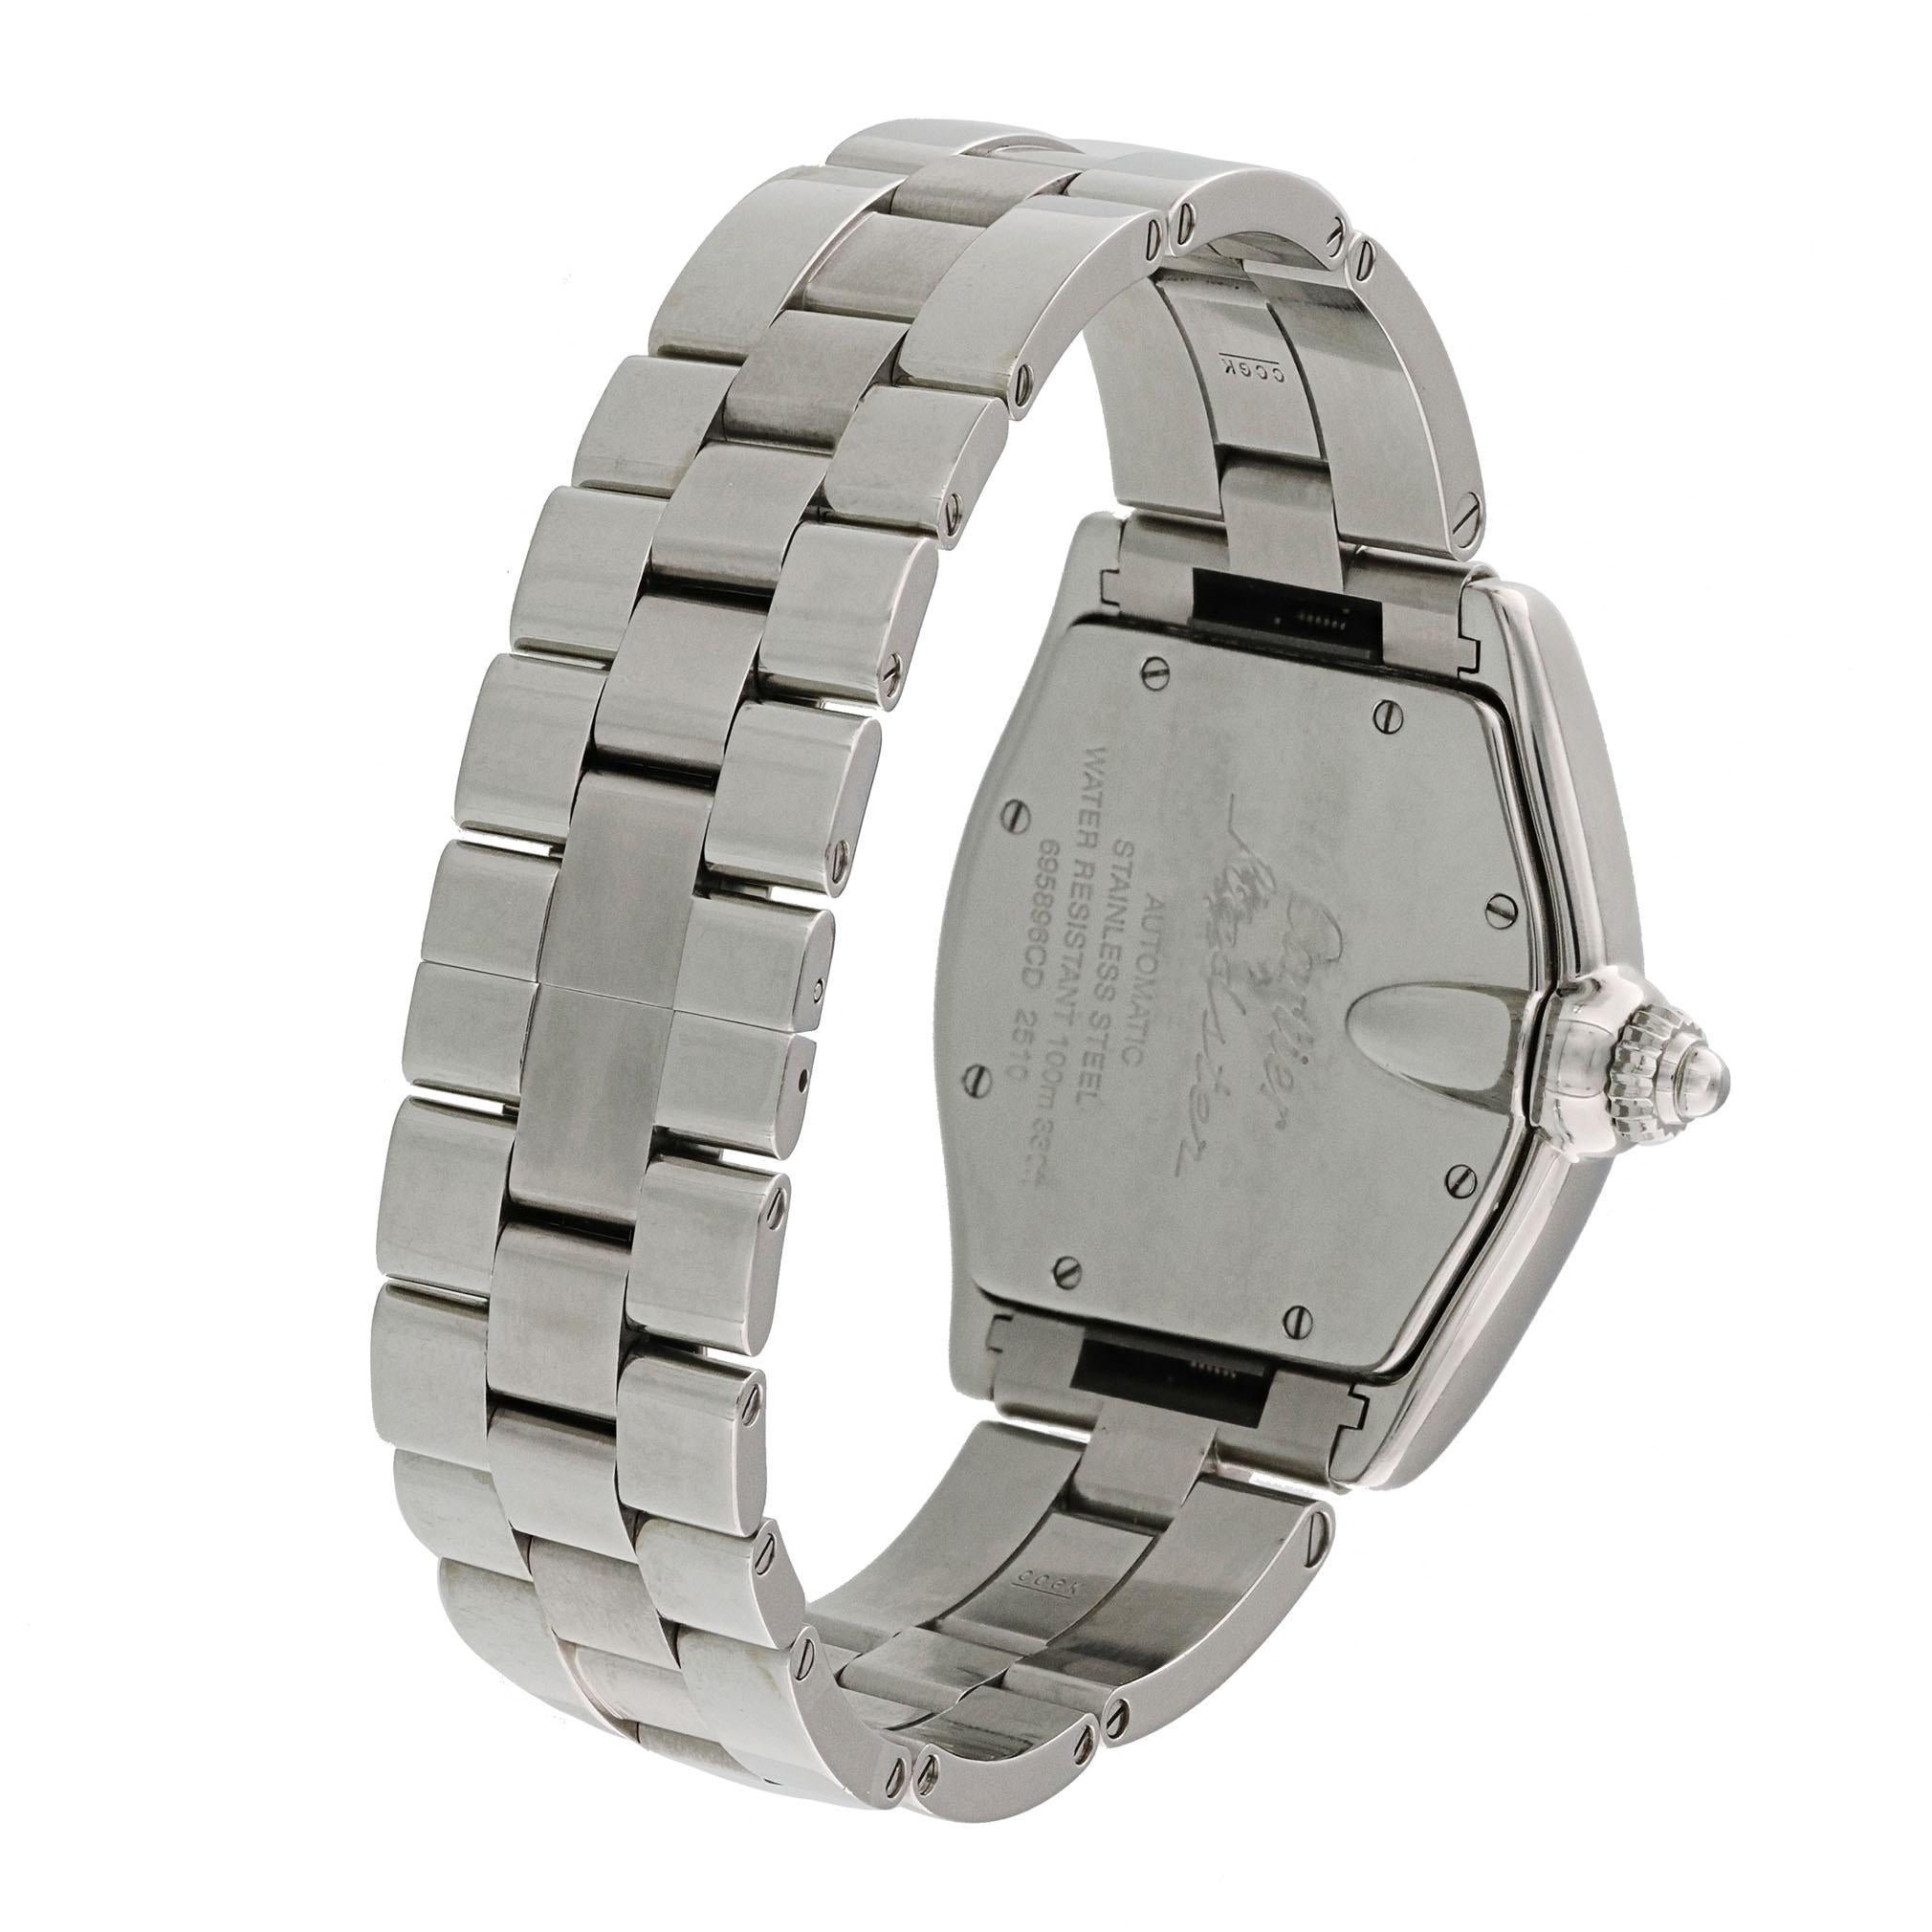 Cartier Roadster 2510 Men's Watch.
38mm Stainless Steel case. 
Stainless Steel smooth bezel. 
Gray dial with Luminous Steel hands and index hour markers. 
Minute markers on the outer dial. 
Date display at the 3 o'clock position. 
Stainless Steel